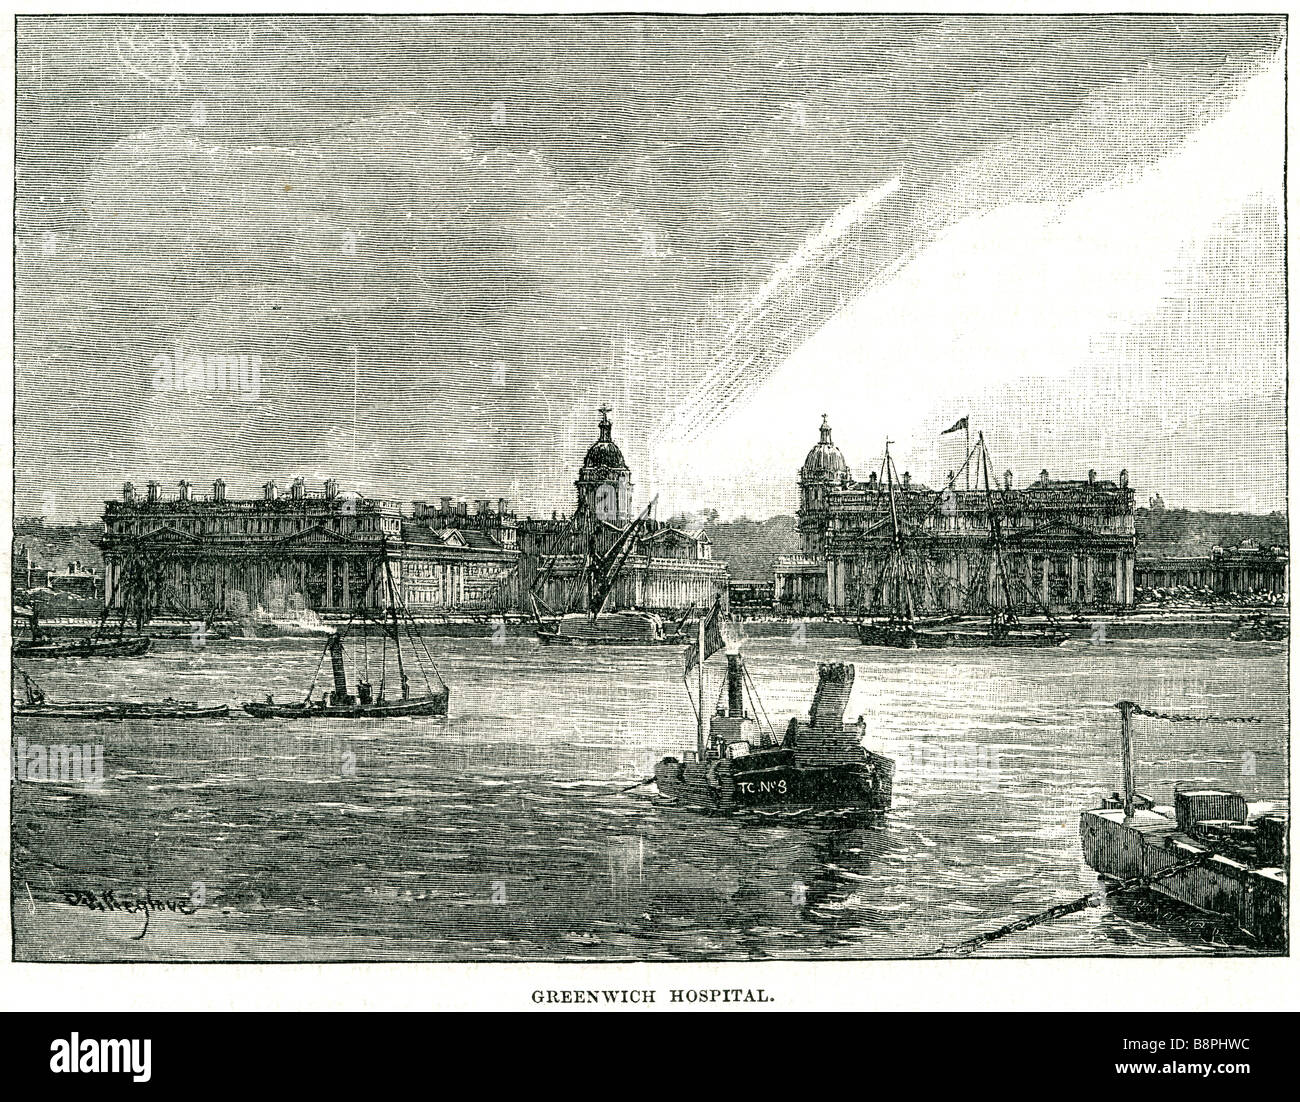 greenwich hospital river banks ship steam boat tug city The Old Royal Naval College is the architectural centrepiece of Maritime Stock Photo